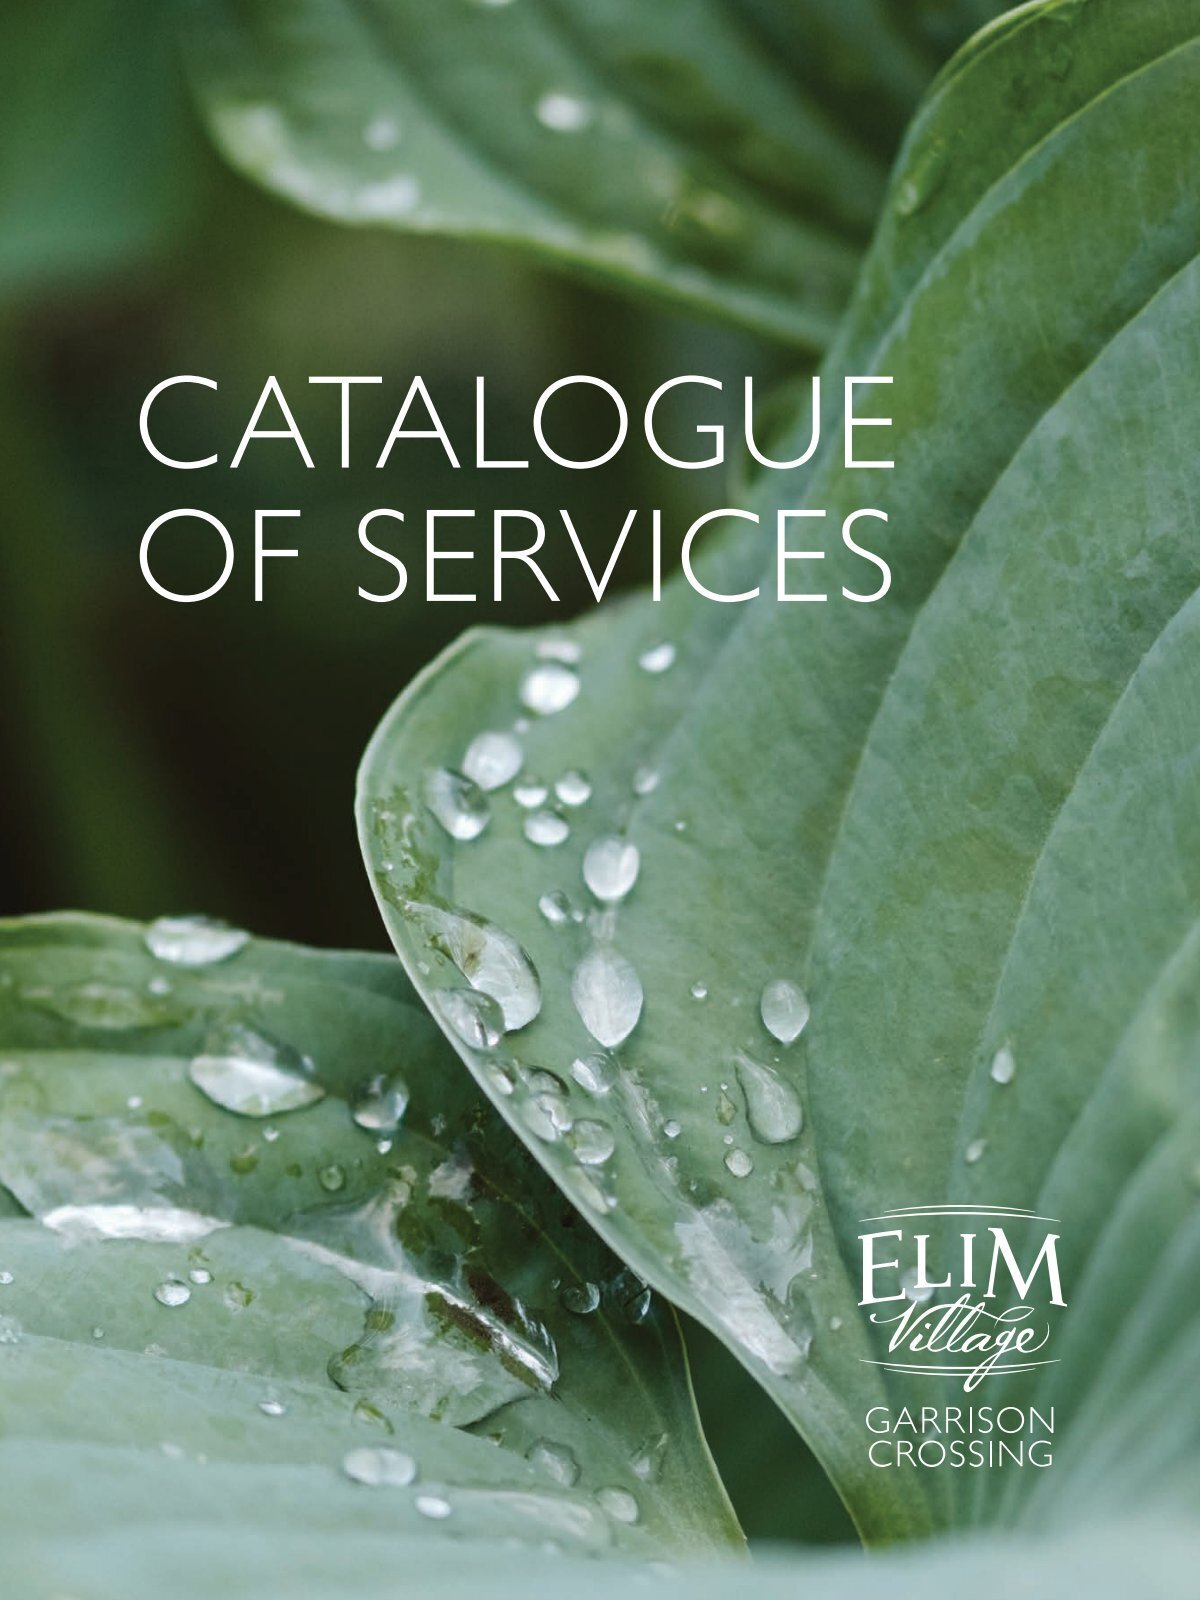 Catalogue of Services for Elim Village Garrison Crossing